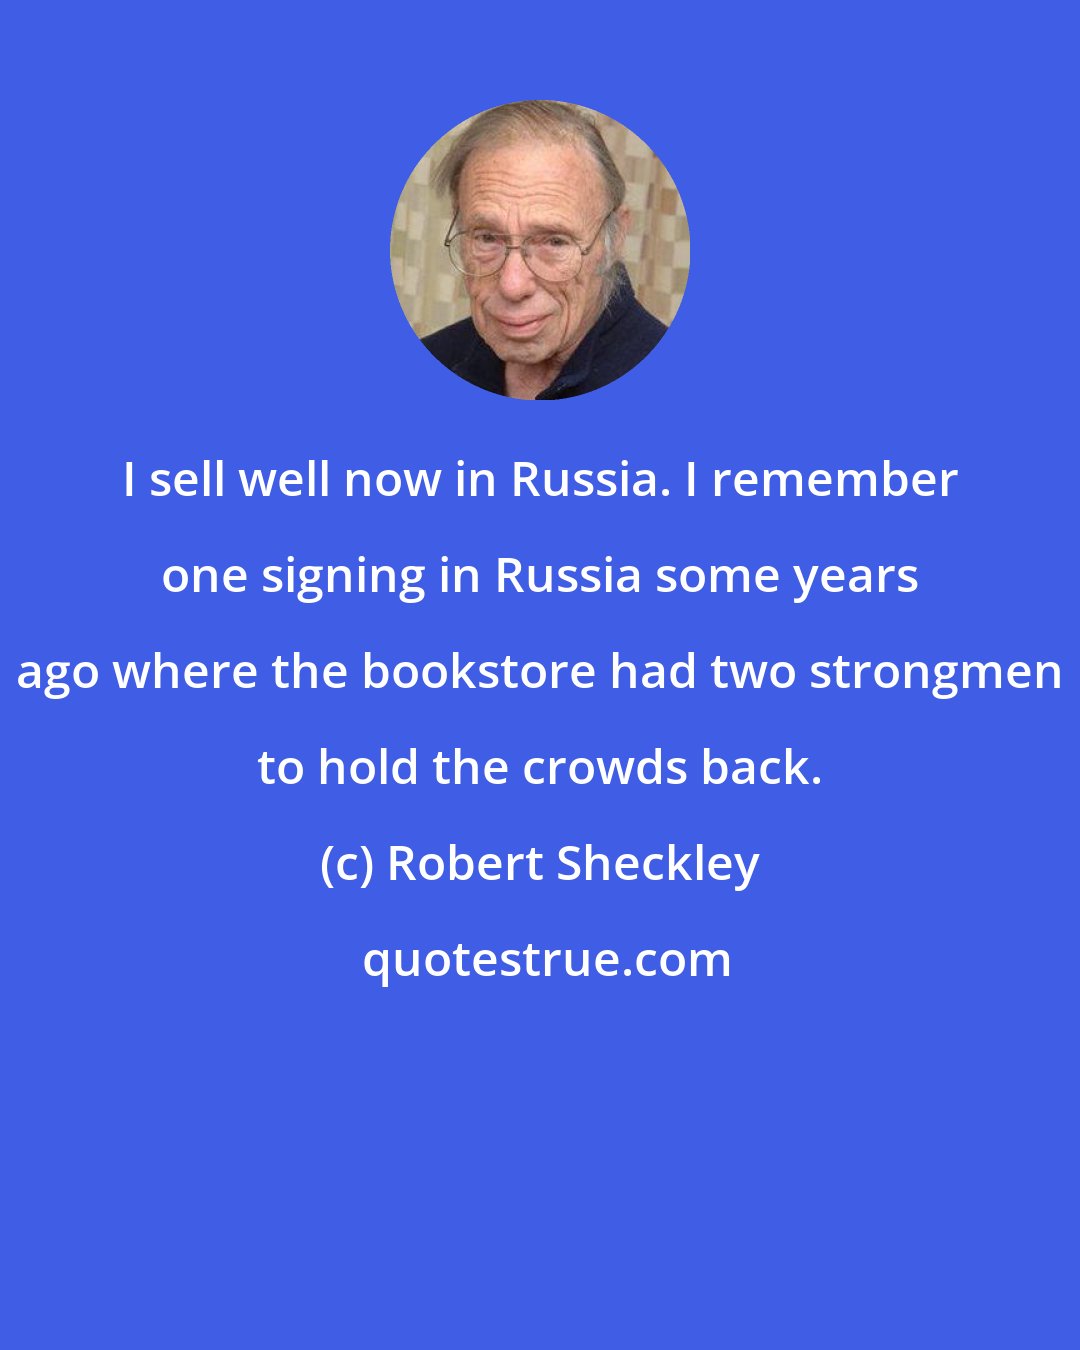 Robert Sheckley: I sell well now in Russia. I remember one signing in Russia some years ago where the bookstore had two strongmen to hold the crowds back.